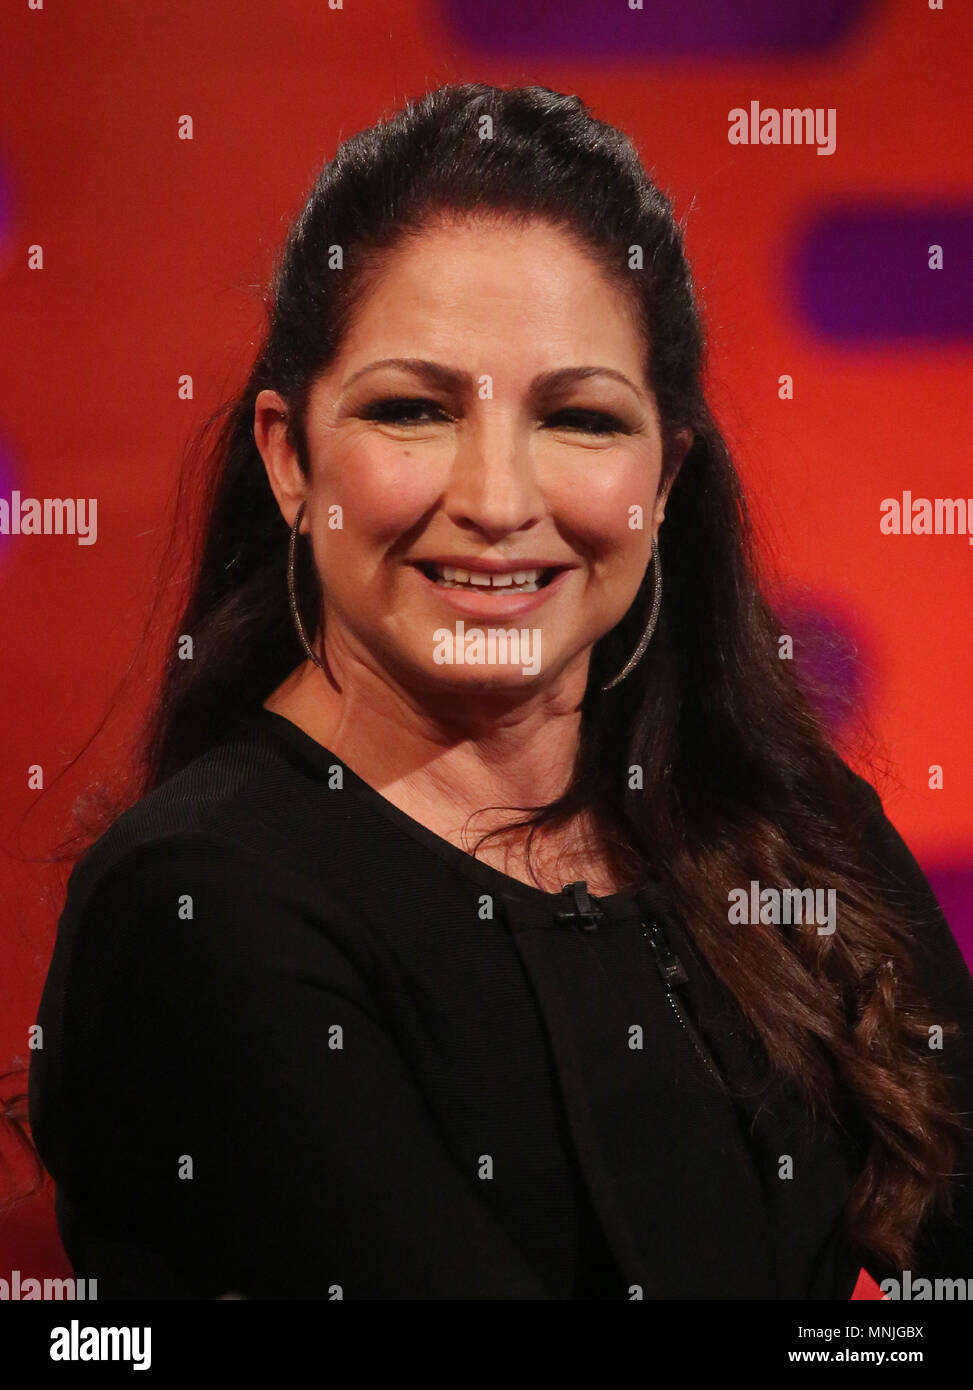 Gloria Estefan during filming for the Graham Norton Show at BBC Studioworks in London, to be aired on BBC One on Friday. PRESS ASSOCIATION. Picture date: Thursday May 17, 2018. Photo credit should read: PA Images on behalf of So TV Stock Photo